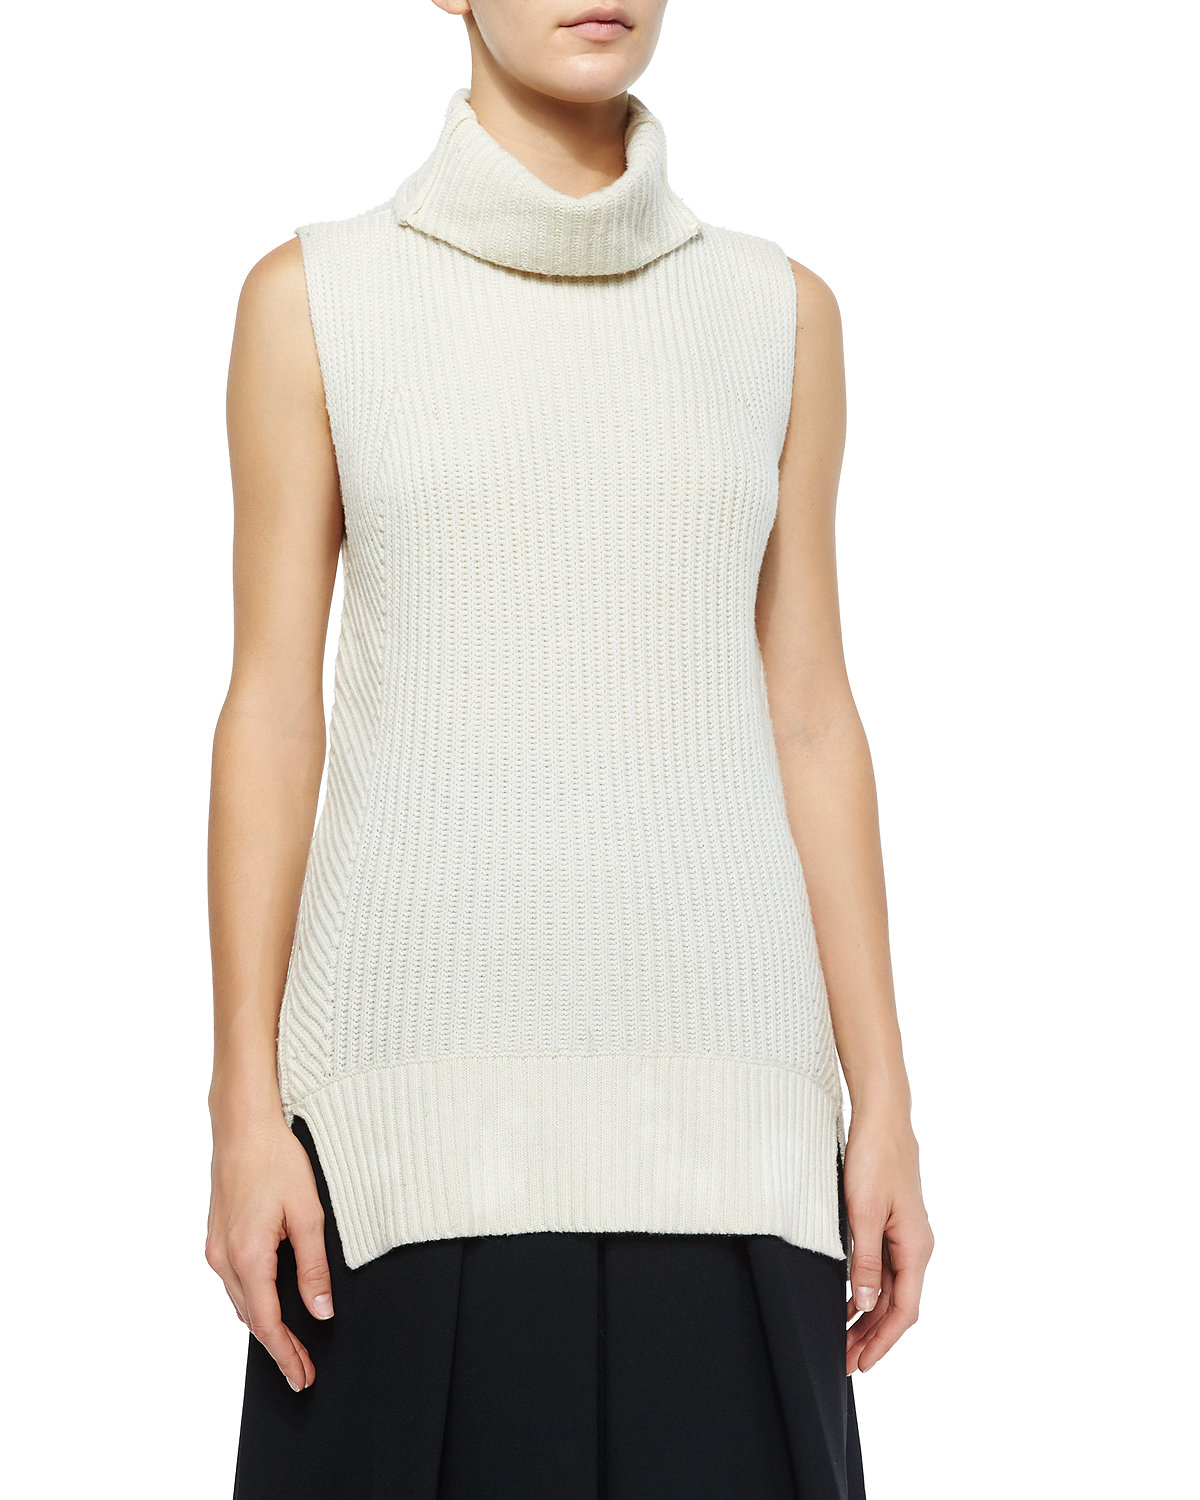 Lyst - Vince Ribbed Sleeveless Turtleneck Sweater in White